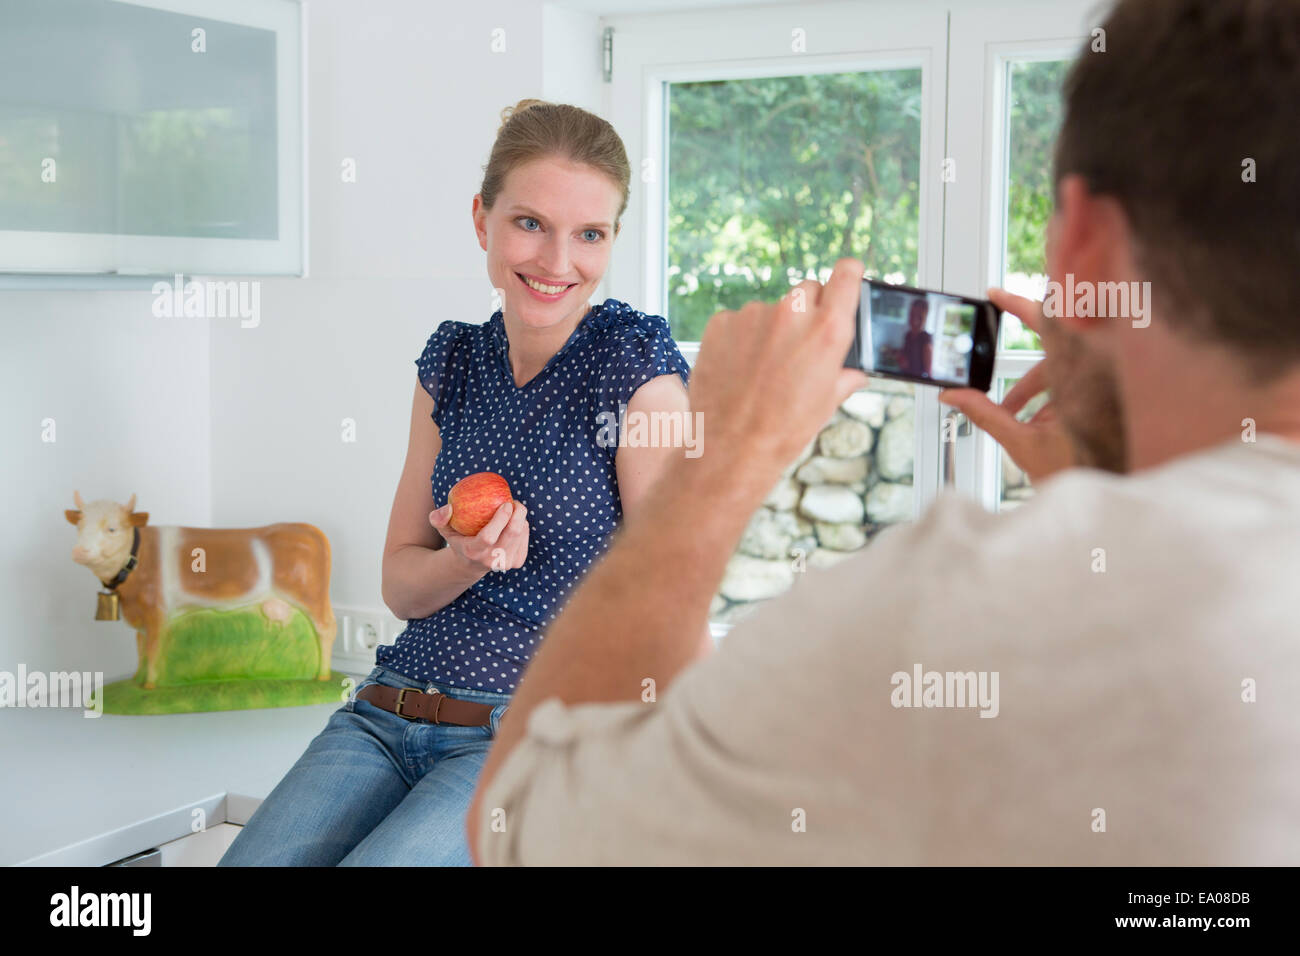 Man photographing woman with camera phone Stock Photo